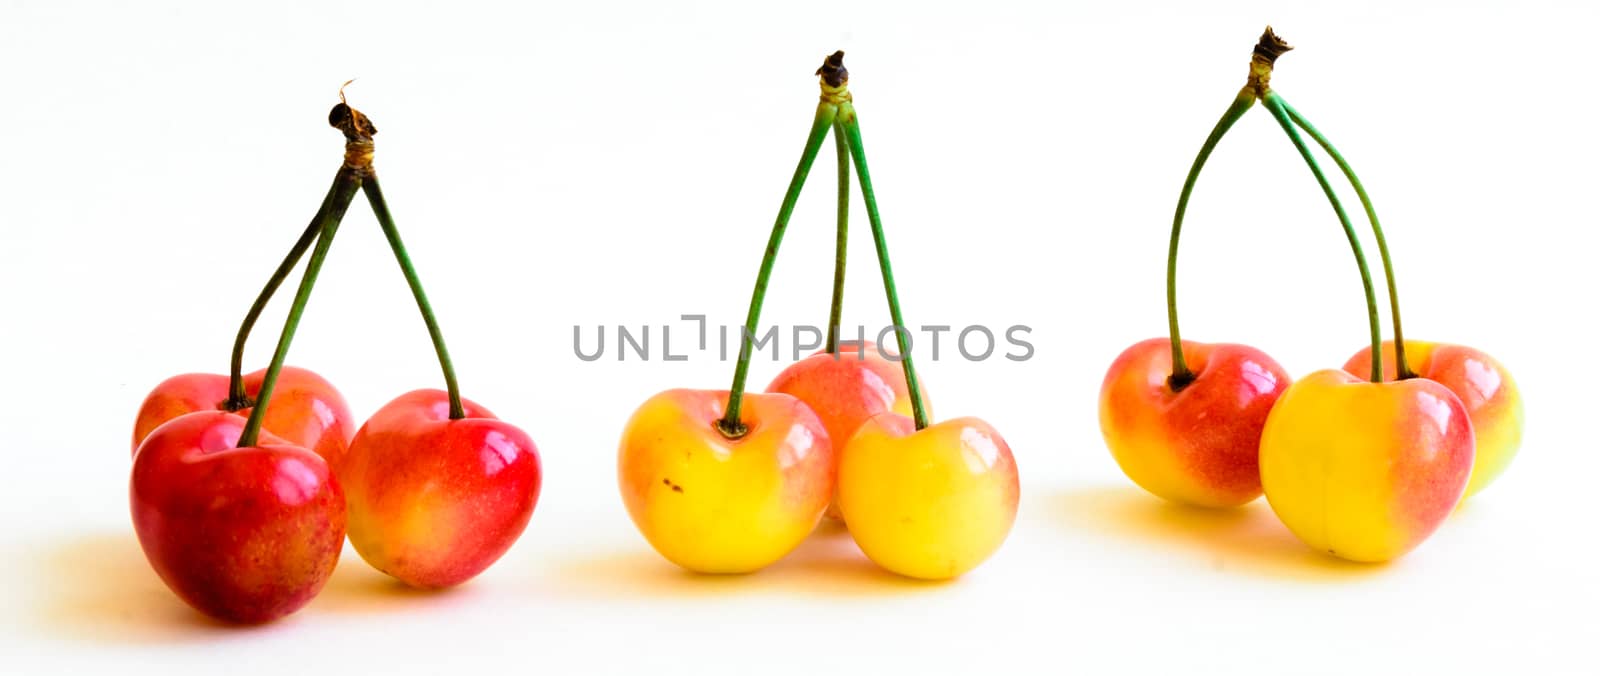 Studio shot group of Rainier cherries in a row with long stems isolated on white by trongnguyen